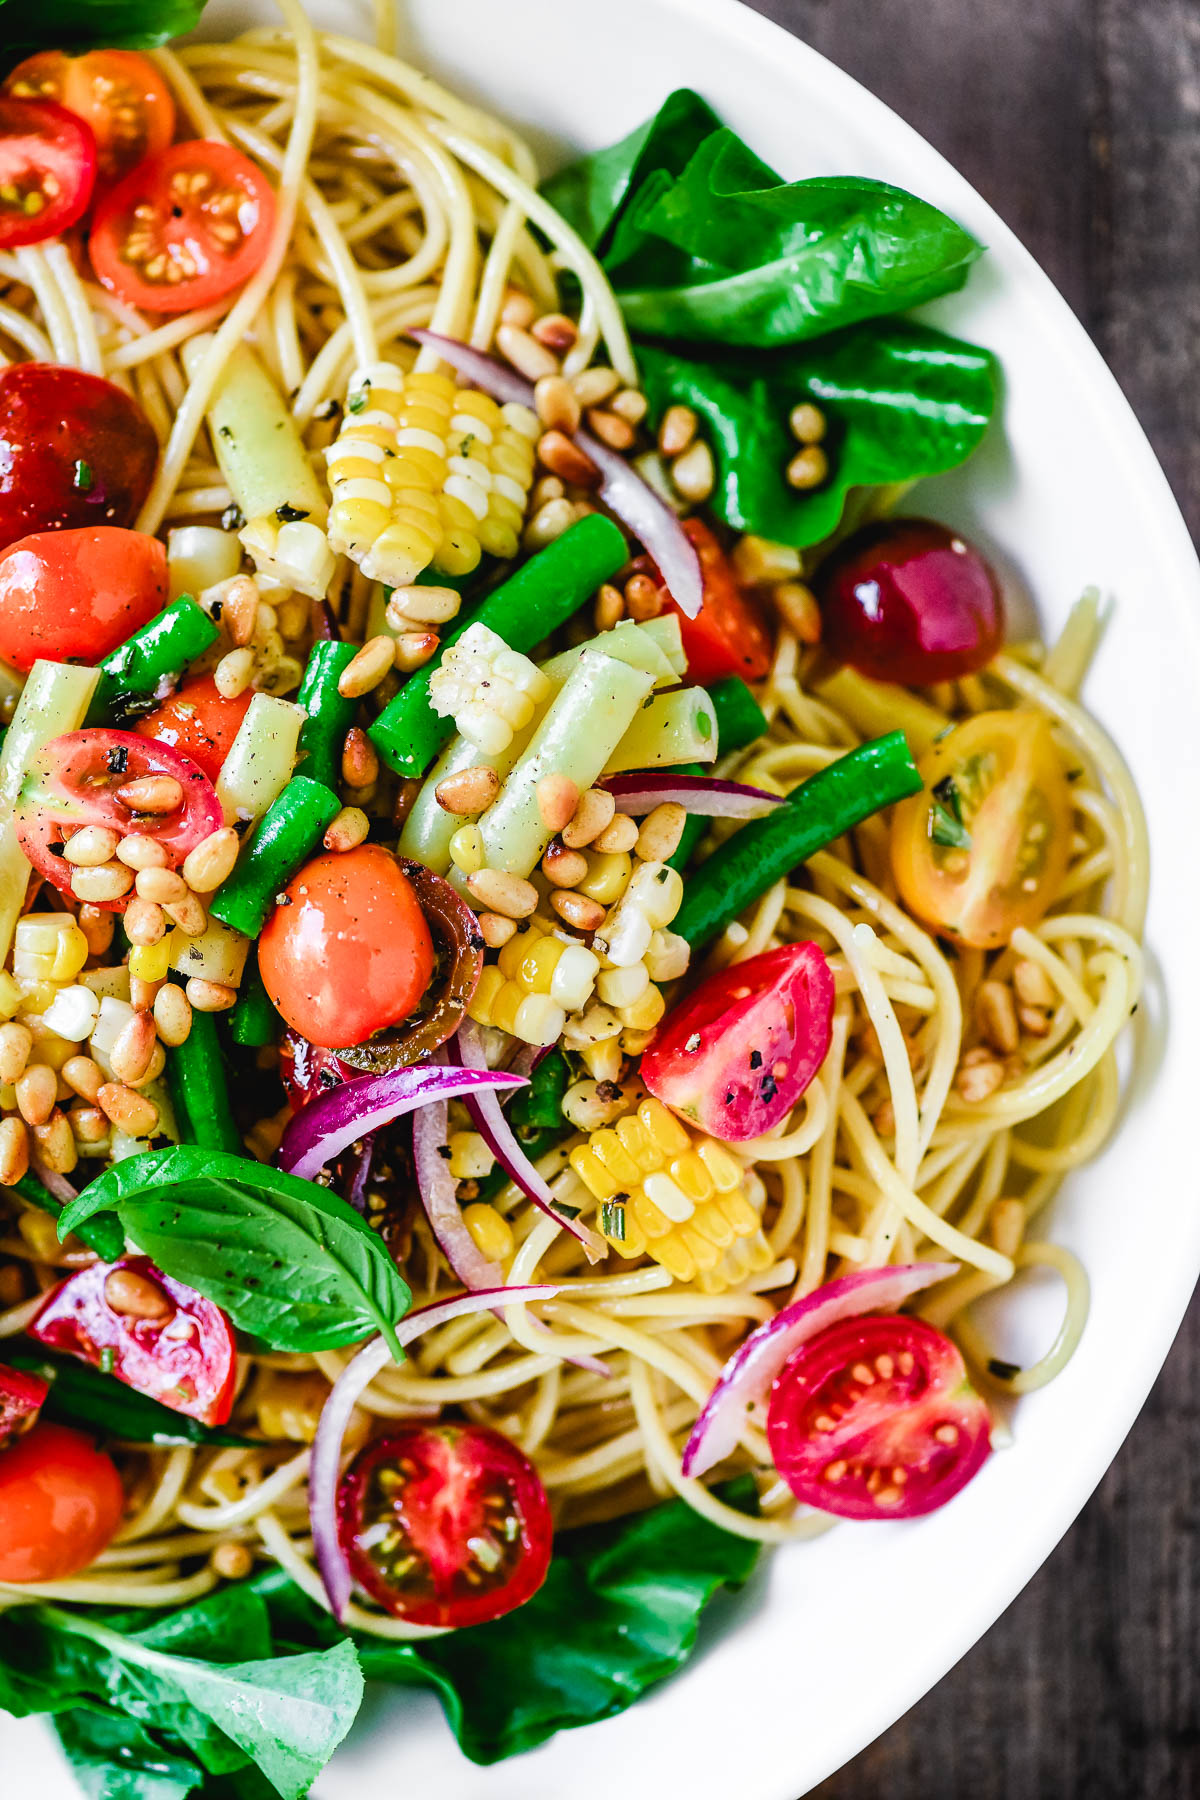 Spaghetti salad with baby tomatoes, corn, roasted pine nuts red onion and garnished with whole basil leaves.